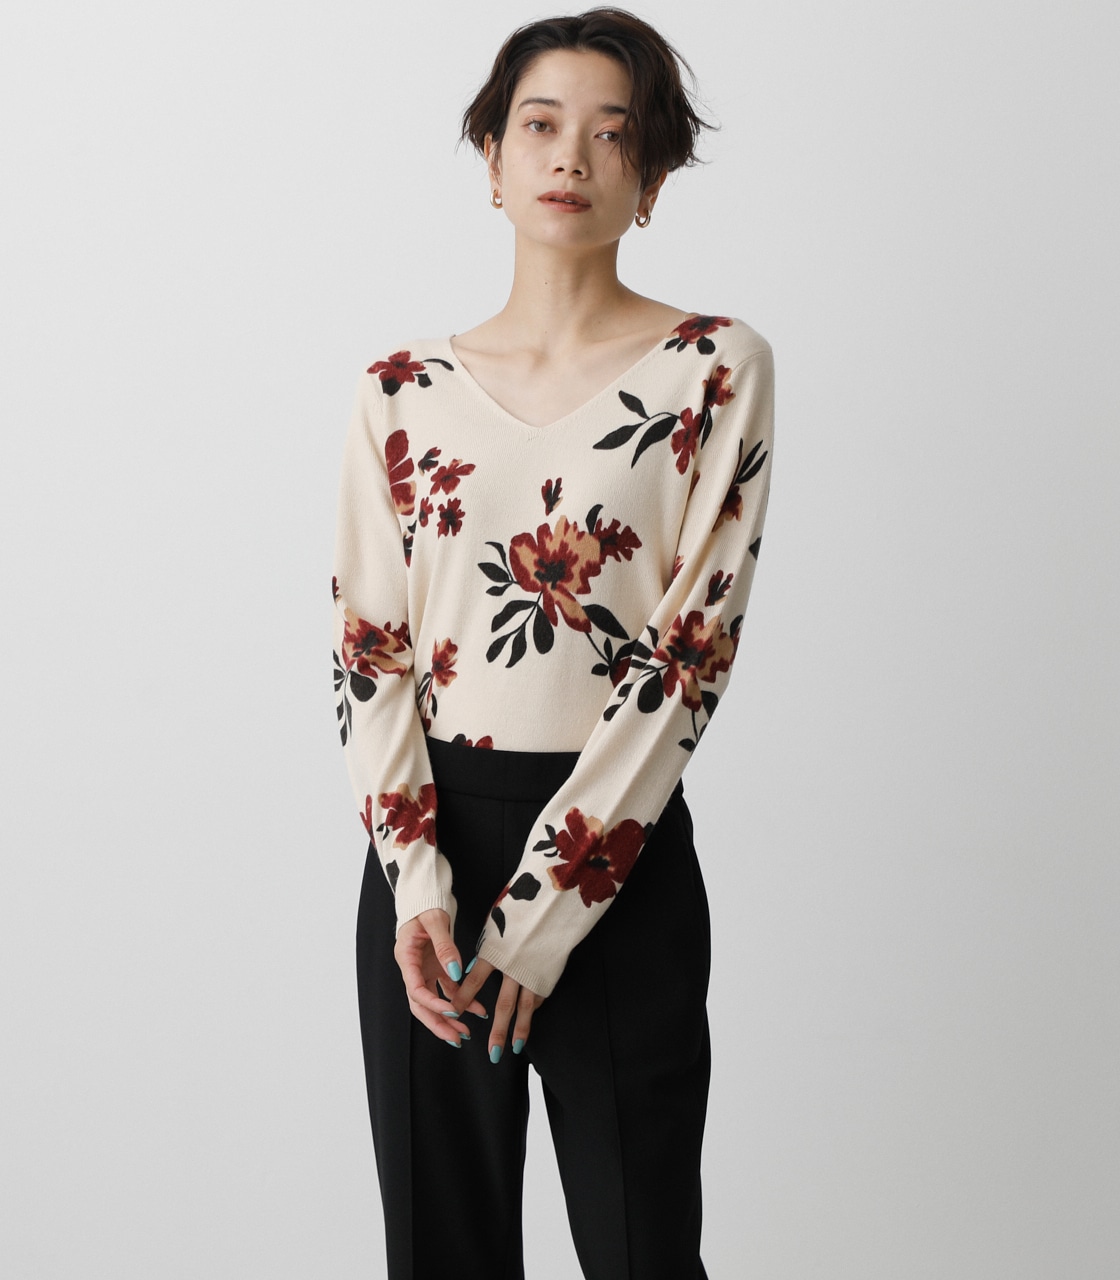 NUDIE 2WAY FLOWER KNIT TOPS/ヌーディー2WAYフラワーニットトップス 詳細画像 柄RED 1